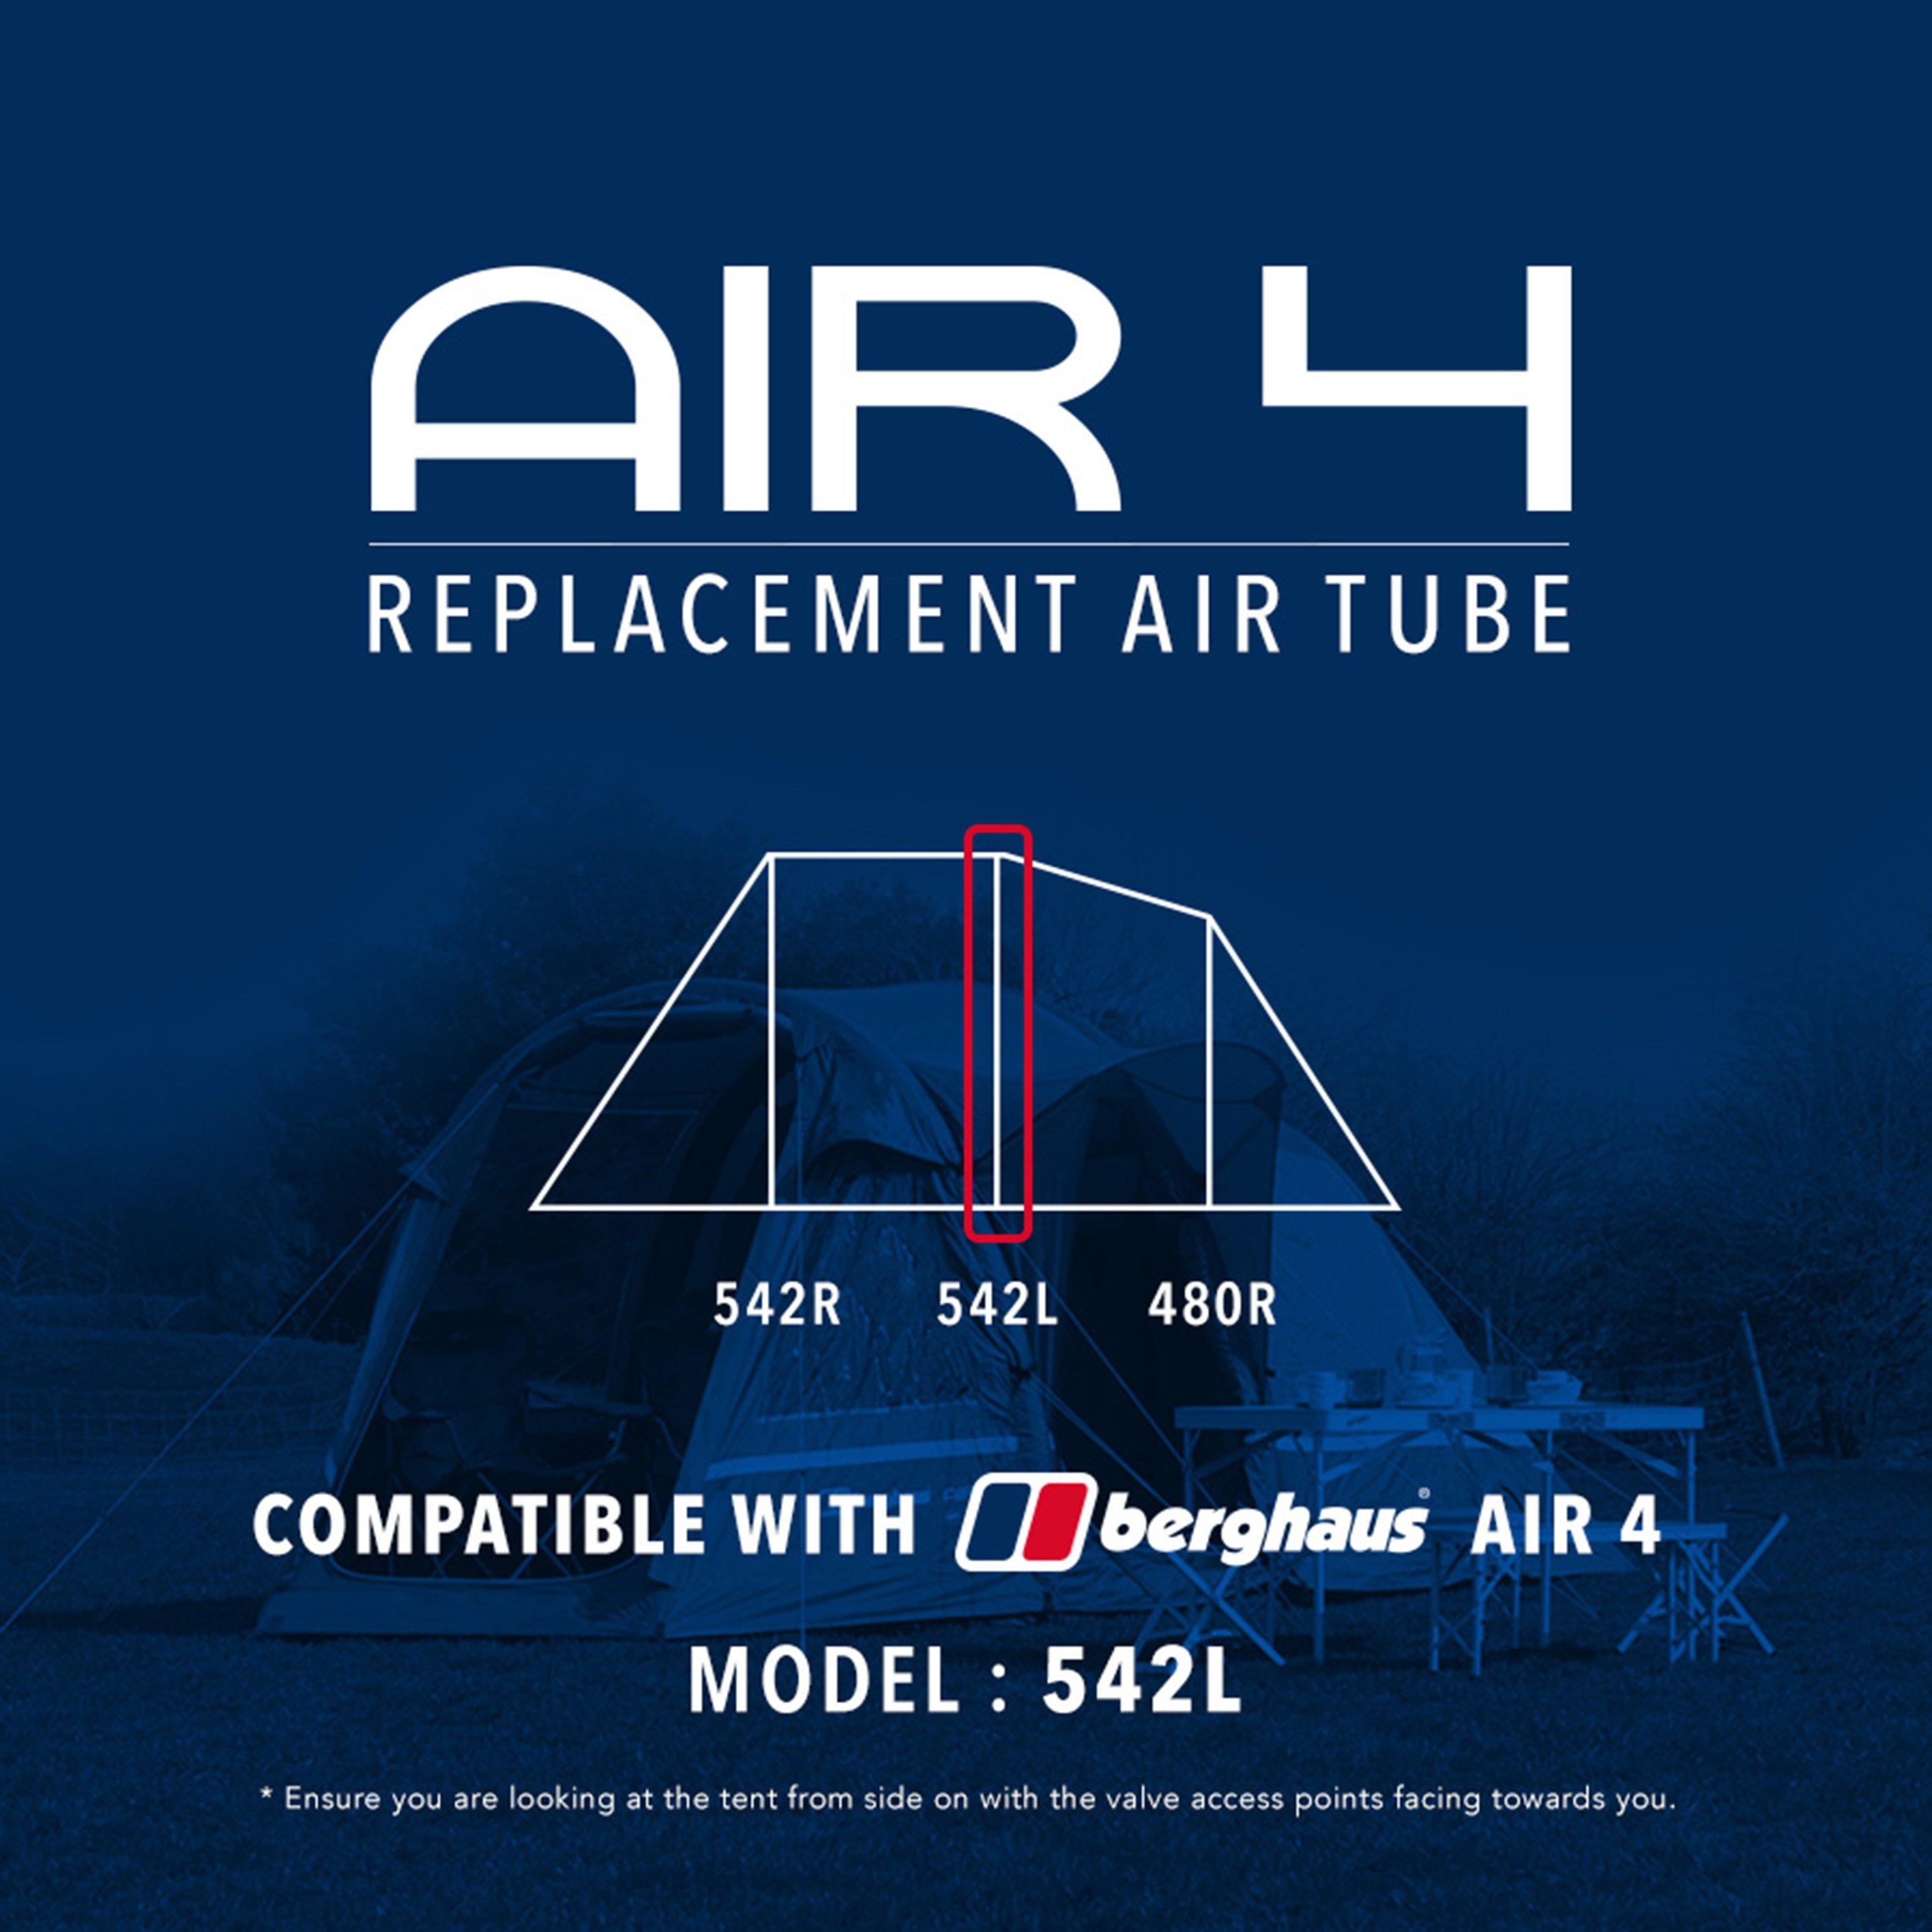 Eurohike Air 4 Tent Replacement Air Tube - 542l  Black